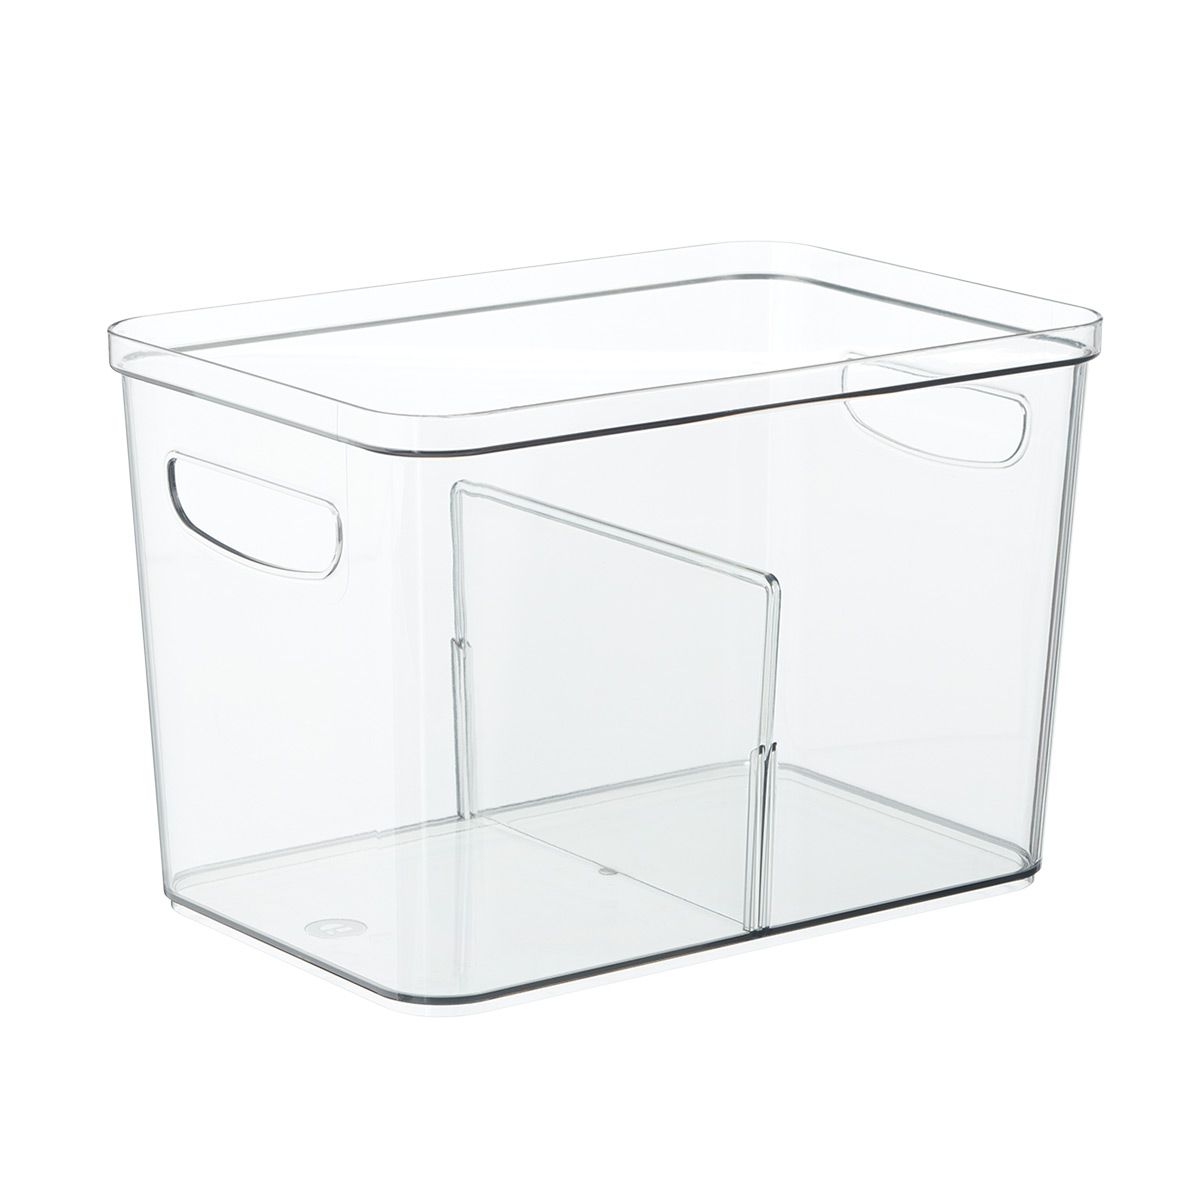 Rosanna Pansino x iD Wide Bin w/ Removable Divider Clear | The Container Store